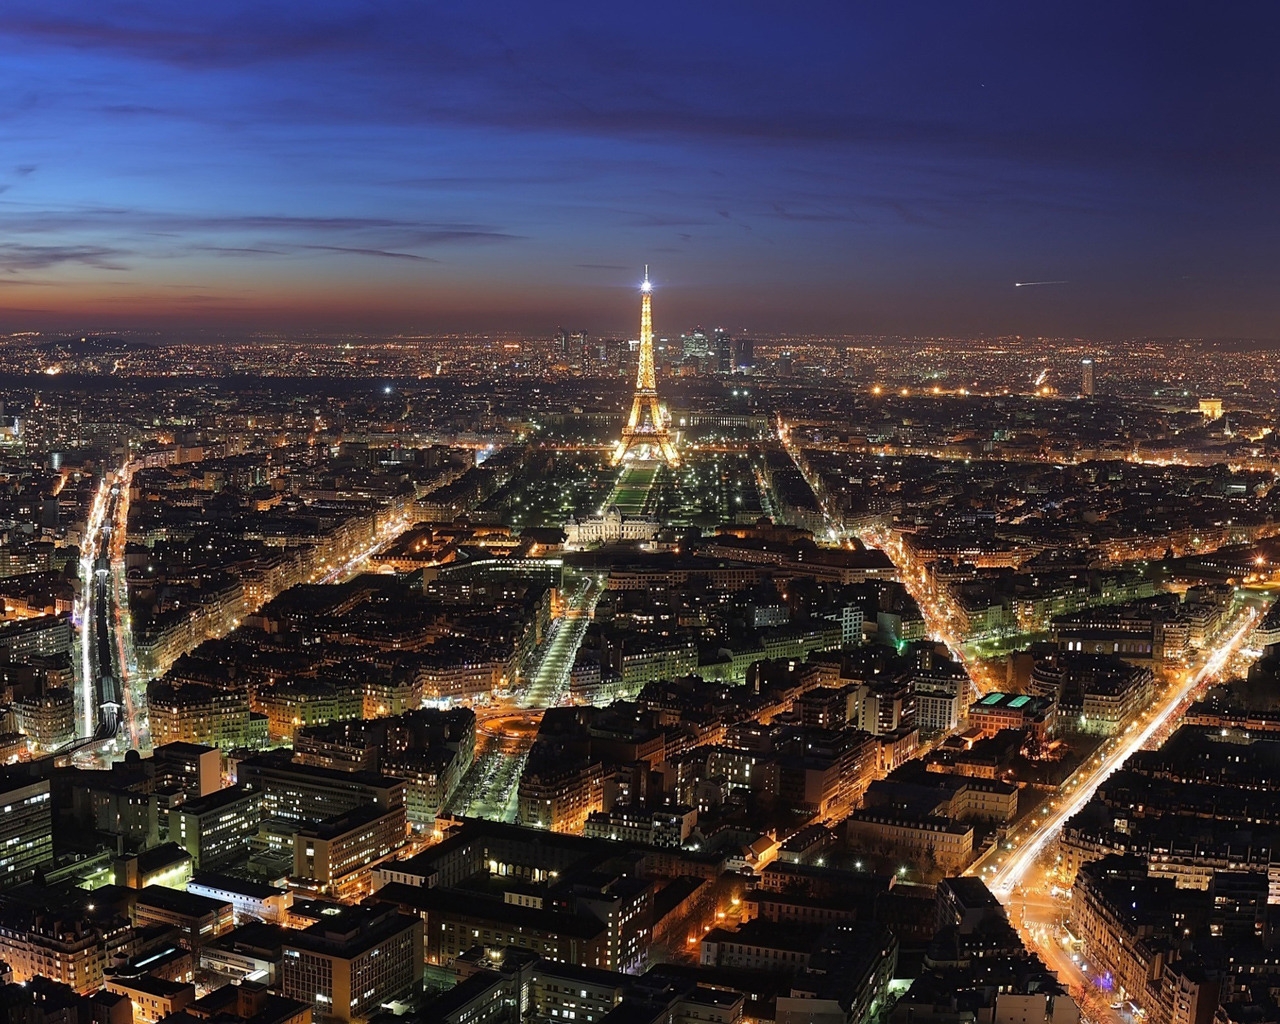 Paris seen at night for 1280 x 1024 resolution